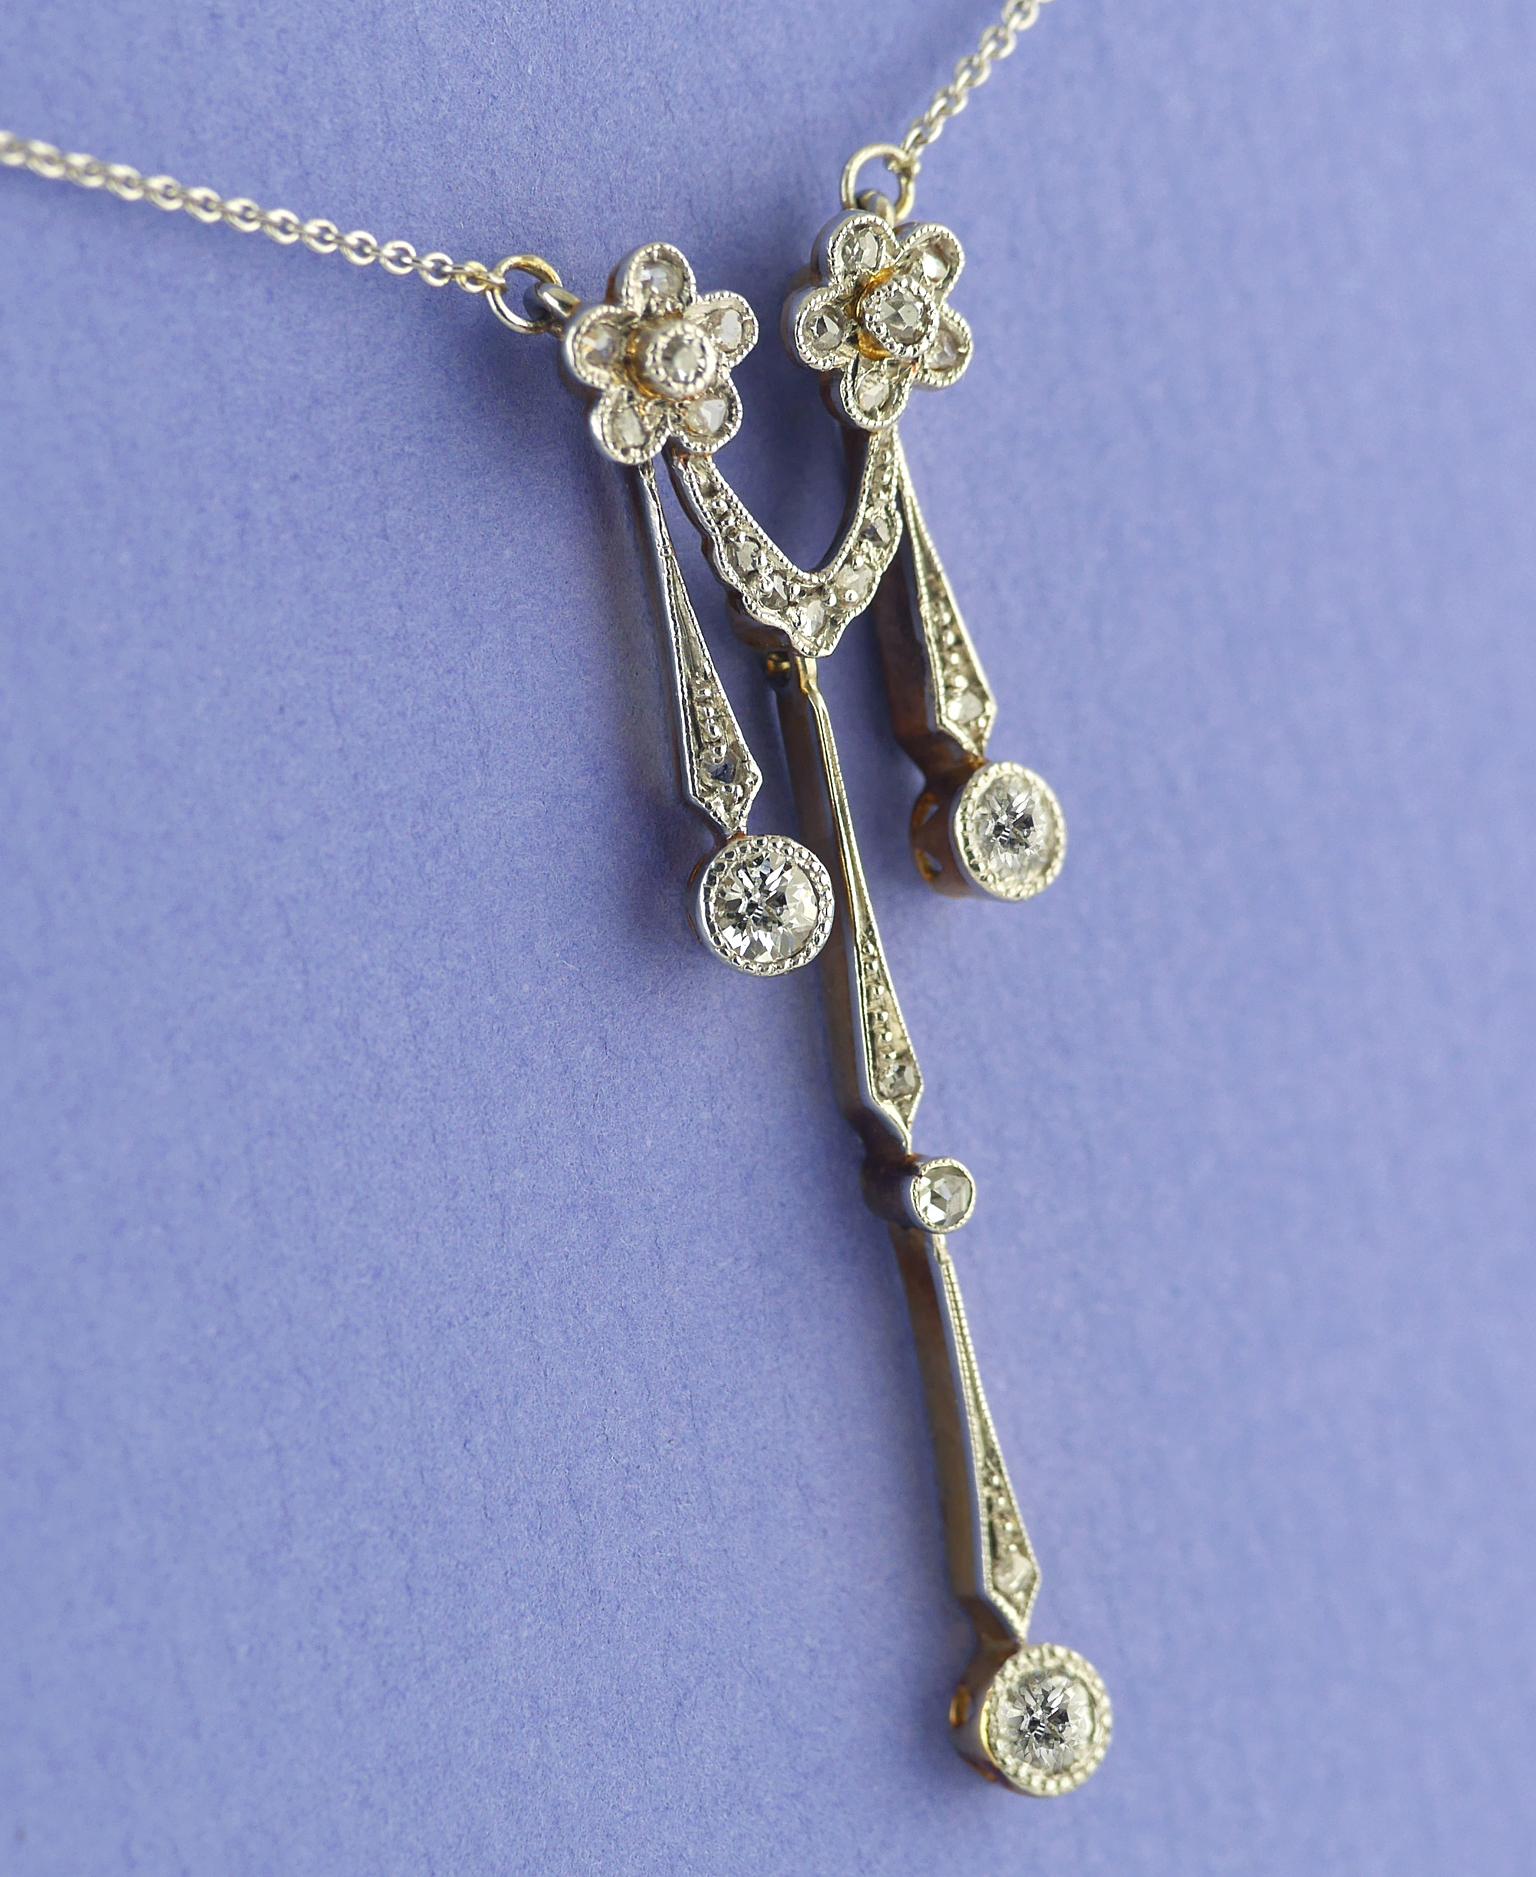 Edwardian Diamond Gold and Platinum Set Pendant circa 1910 on a platinum chain. 

Three principle diamonds, in articulated Edwardian drop collets, Victorian Old Cut (Old Mine) approx. 0.45 carat total.
Mix of old mine and rose cut diamonds in a